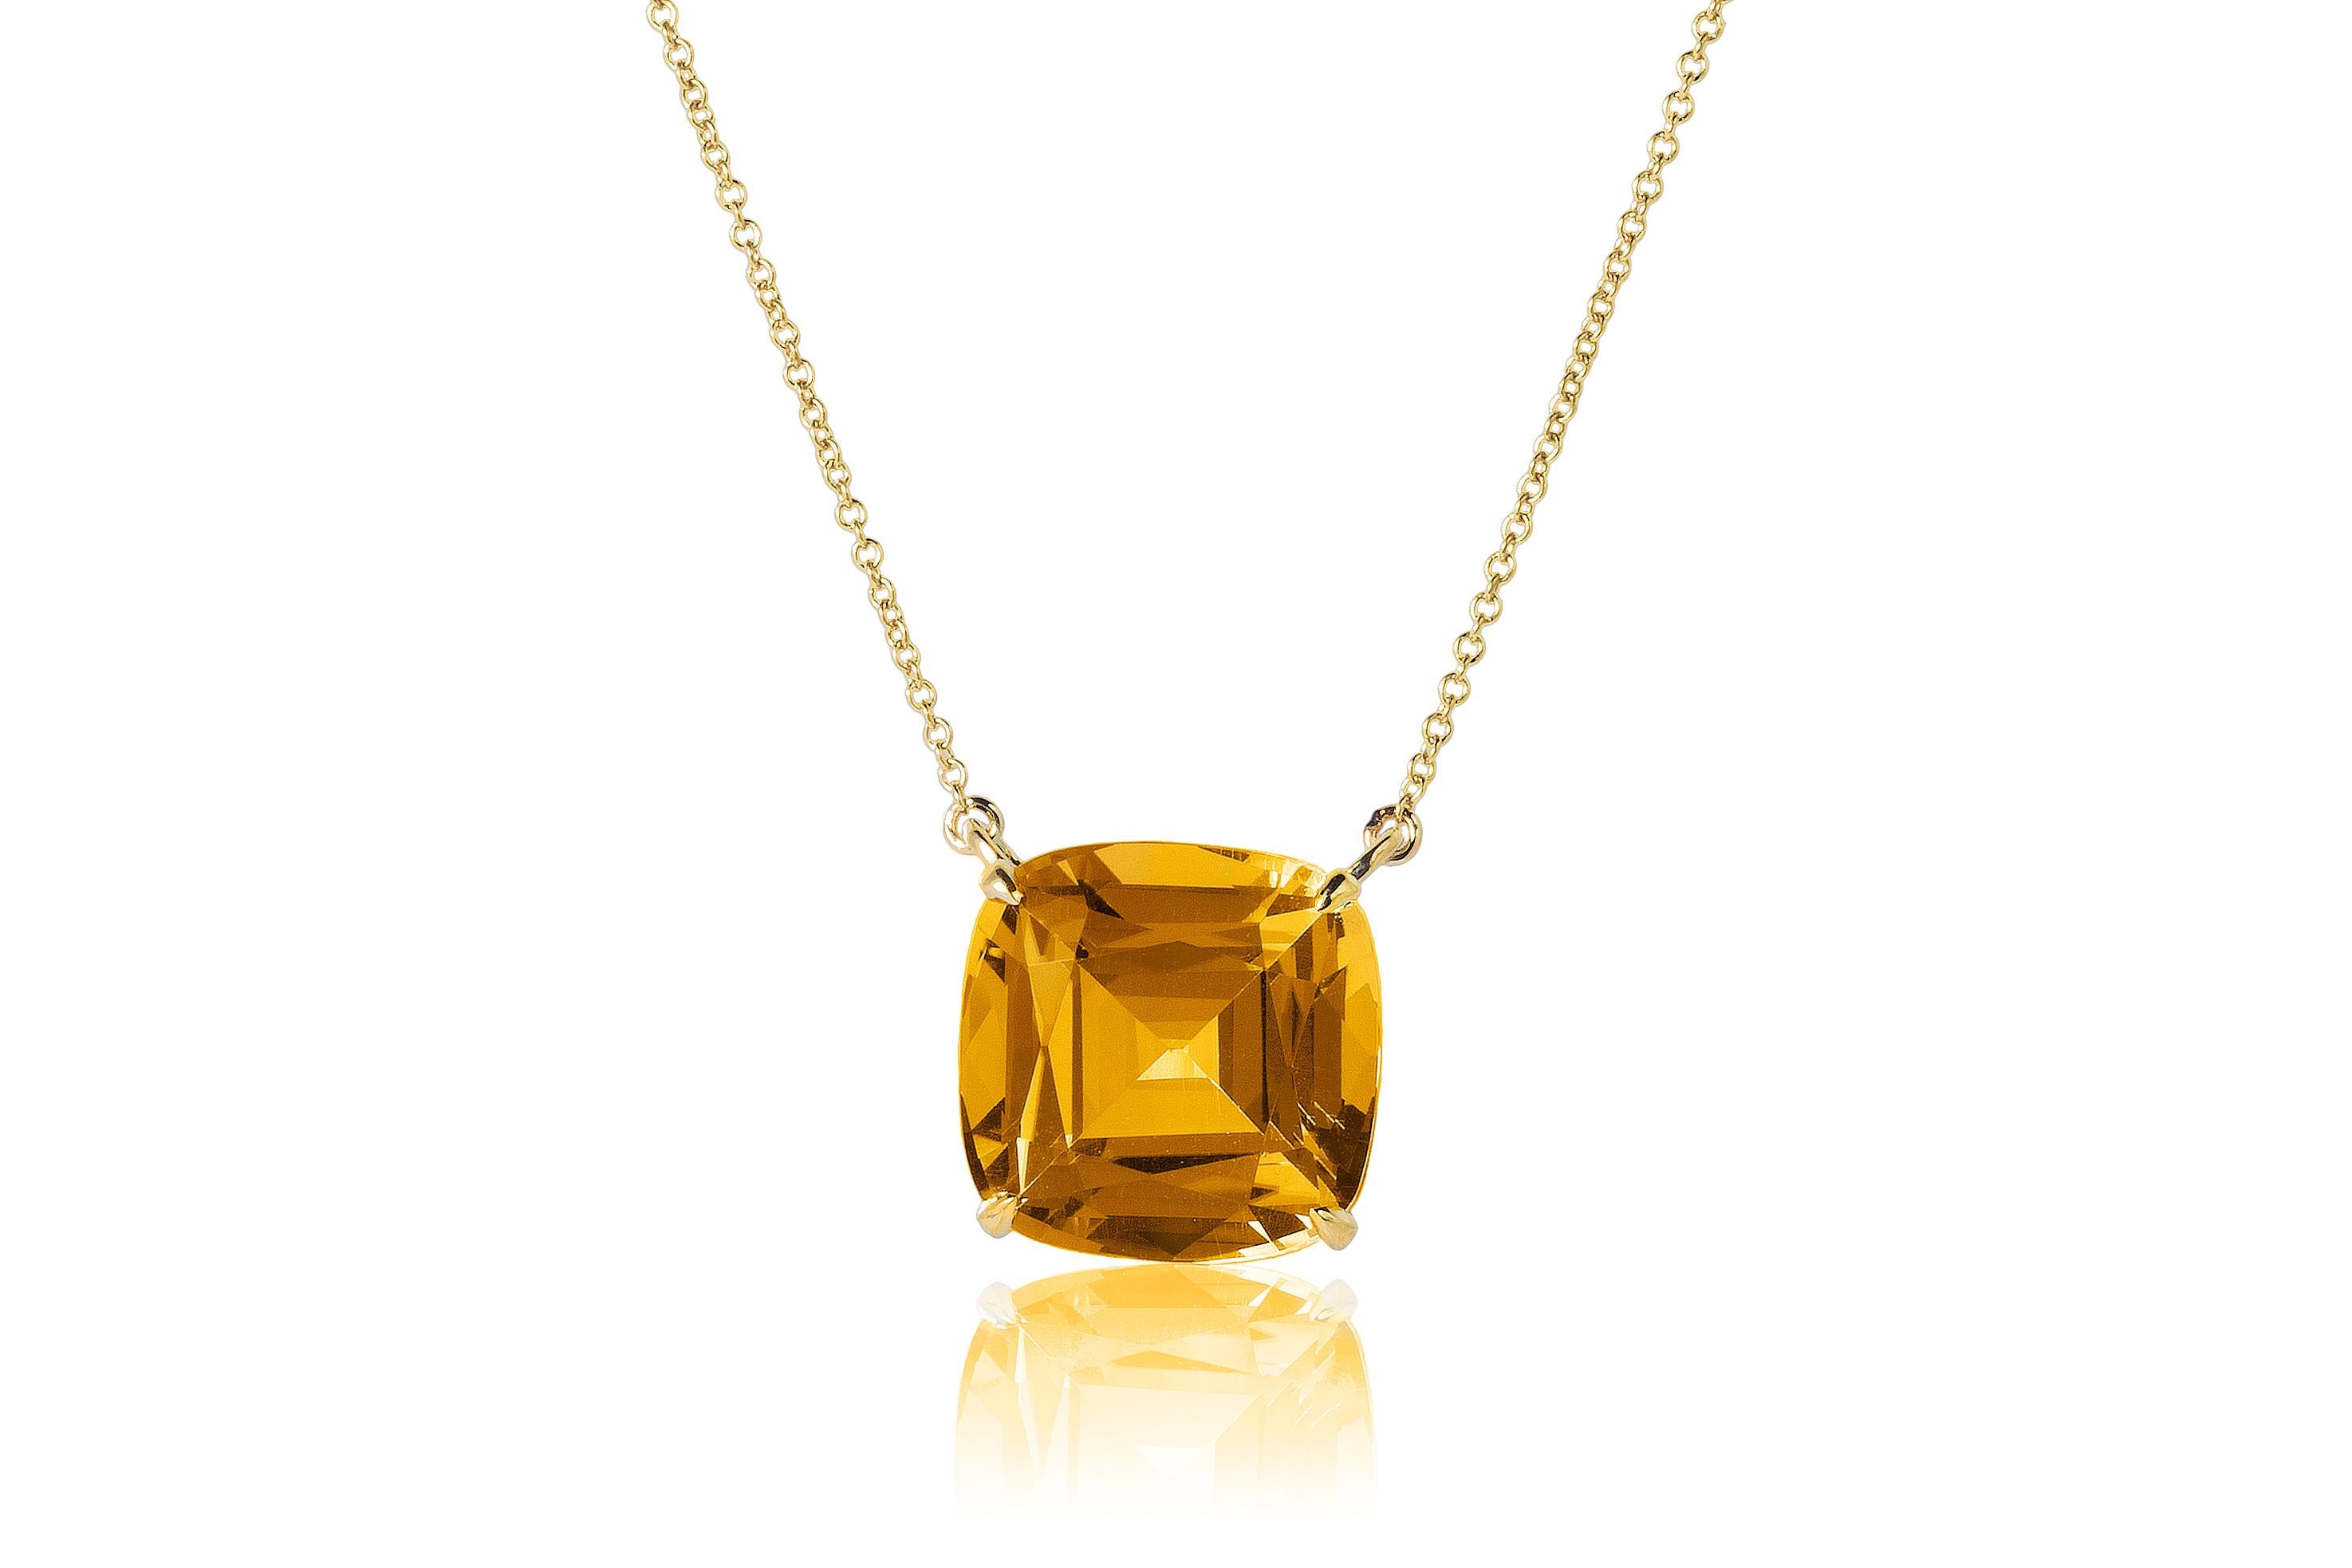 Citrine Cushion Pendant on Cable Chain in 18K Yellow Gold, from ‘Gossip' Collection 
Stone Size: 14 x 14 mm 
Gemstone Approx. Wt: Citrine- 11.20 Carats